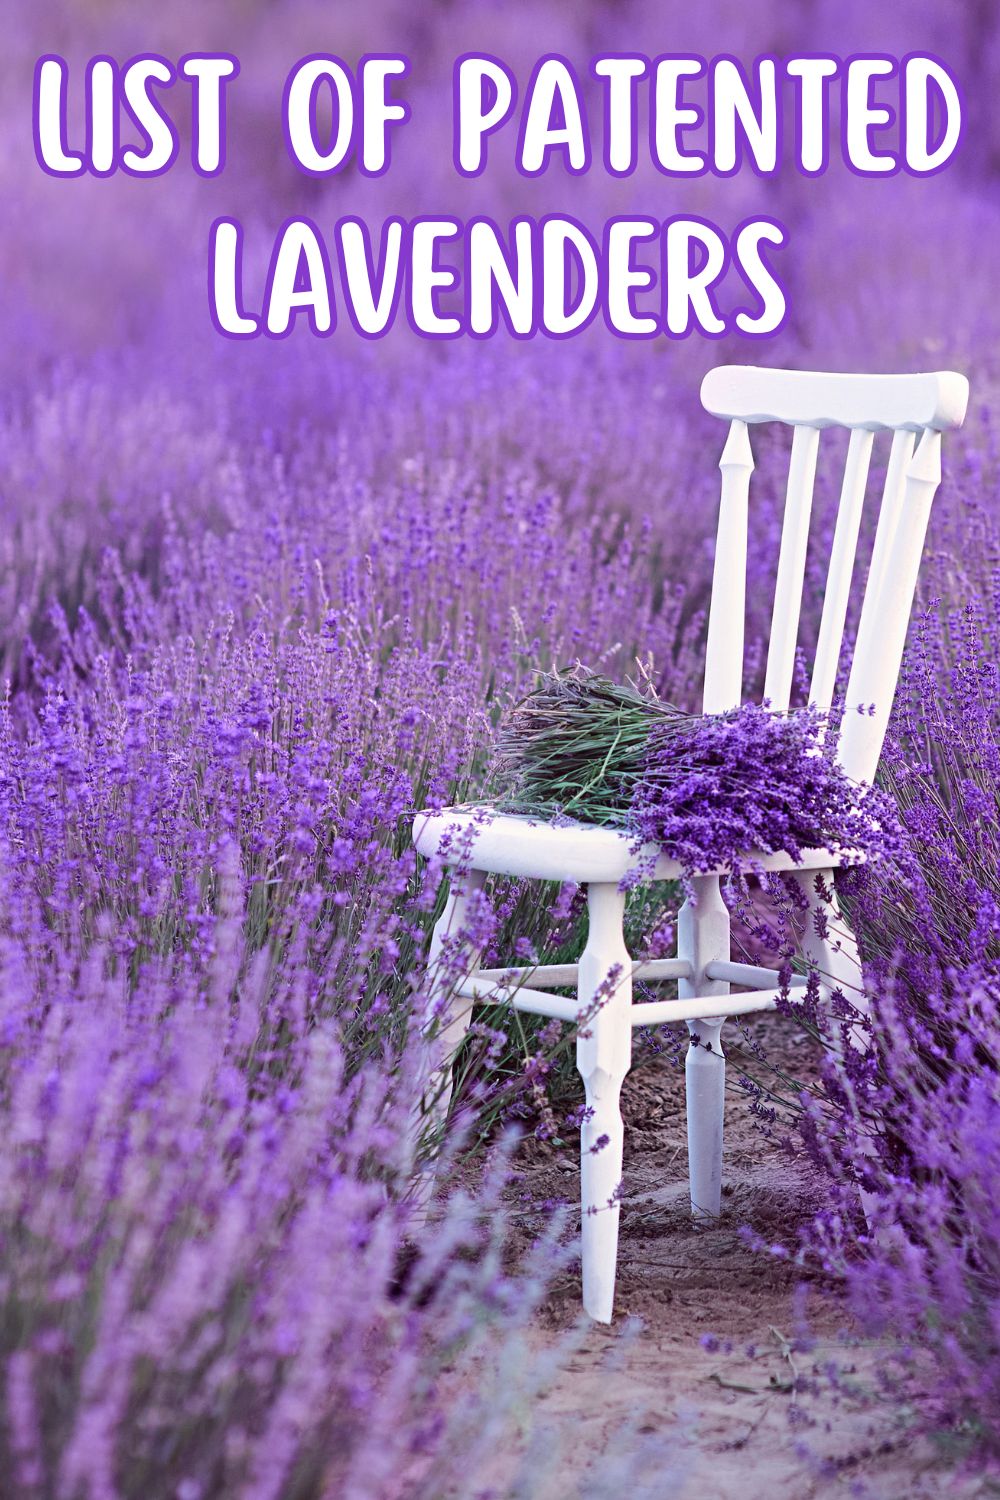 List of patented lavenders.